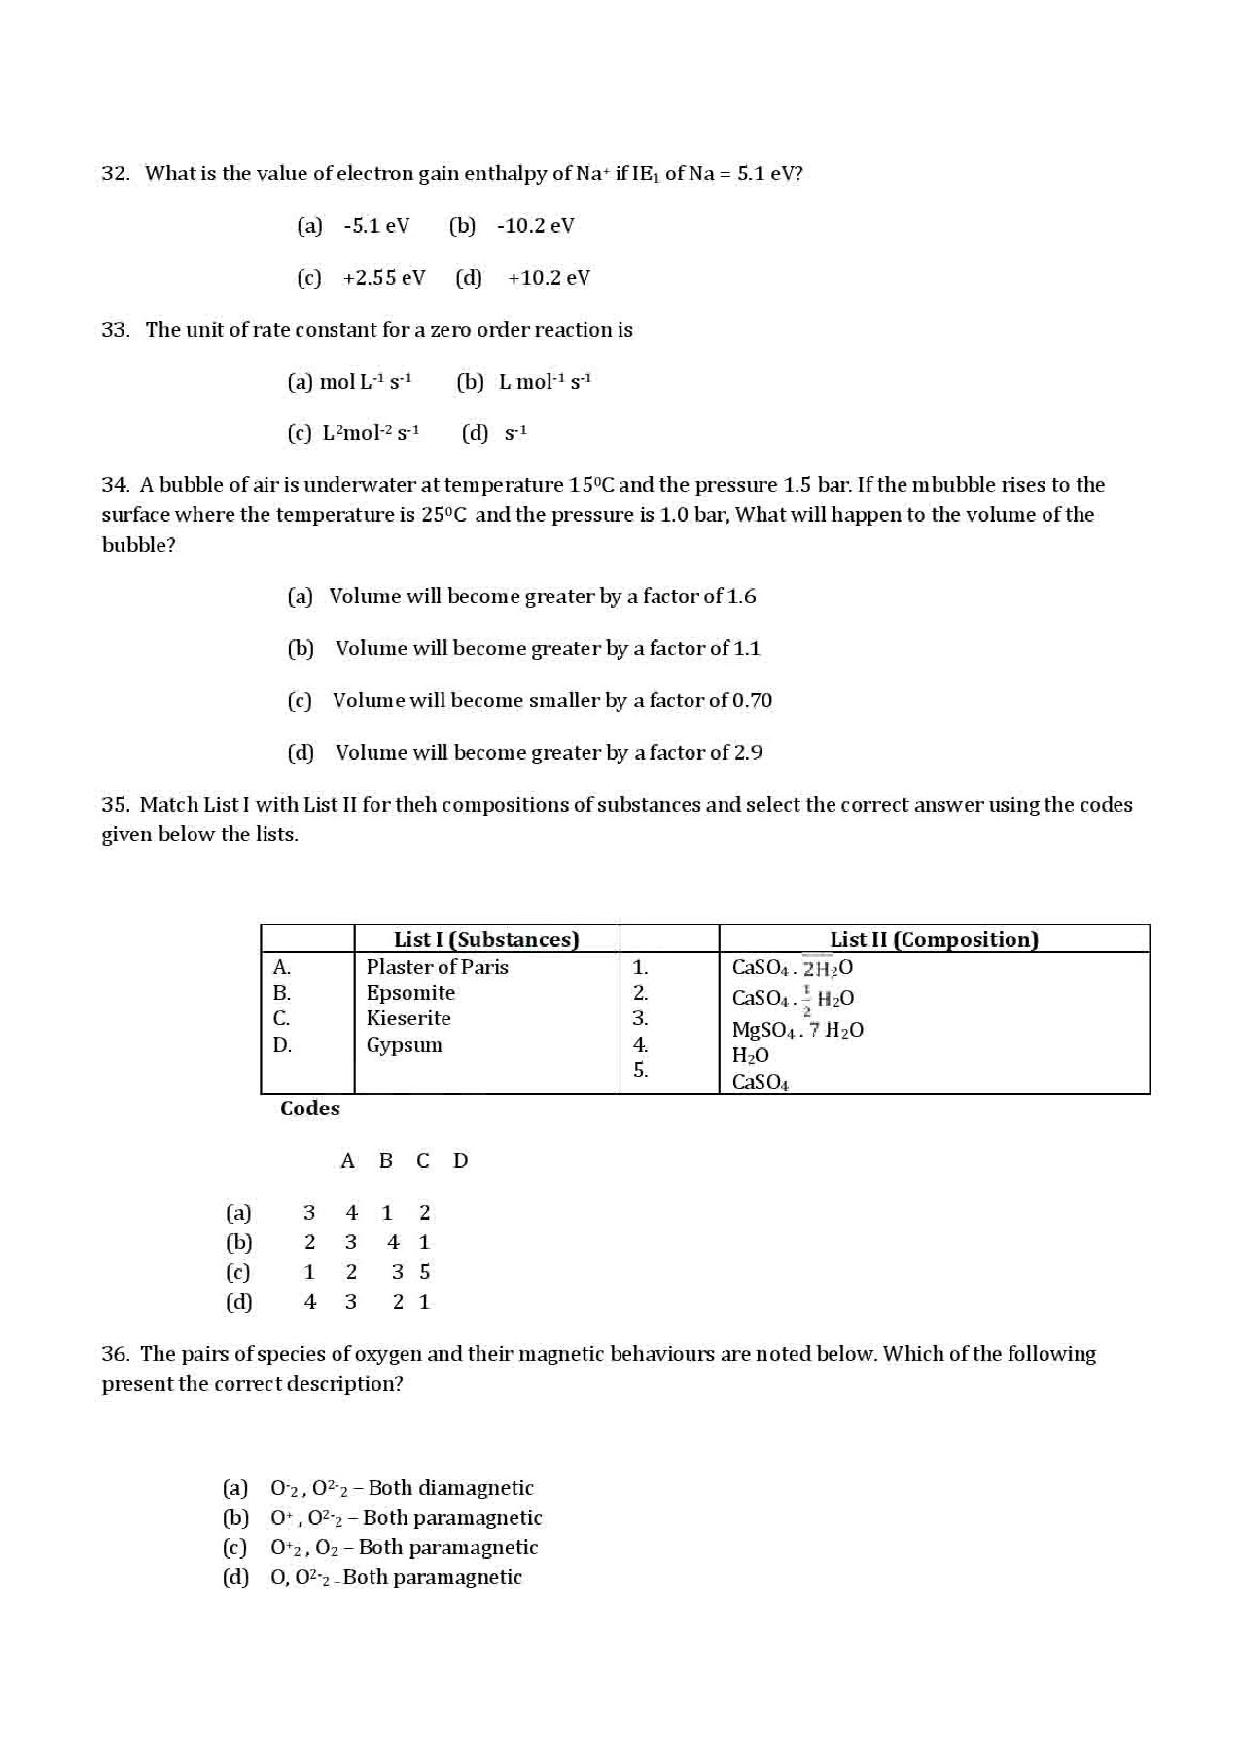 VITEEE Chemistry 2019 Question Paper